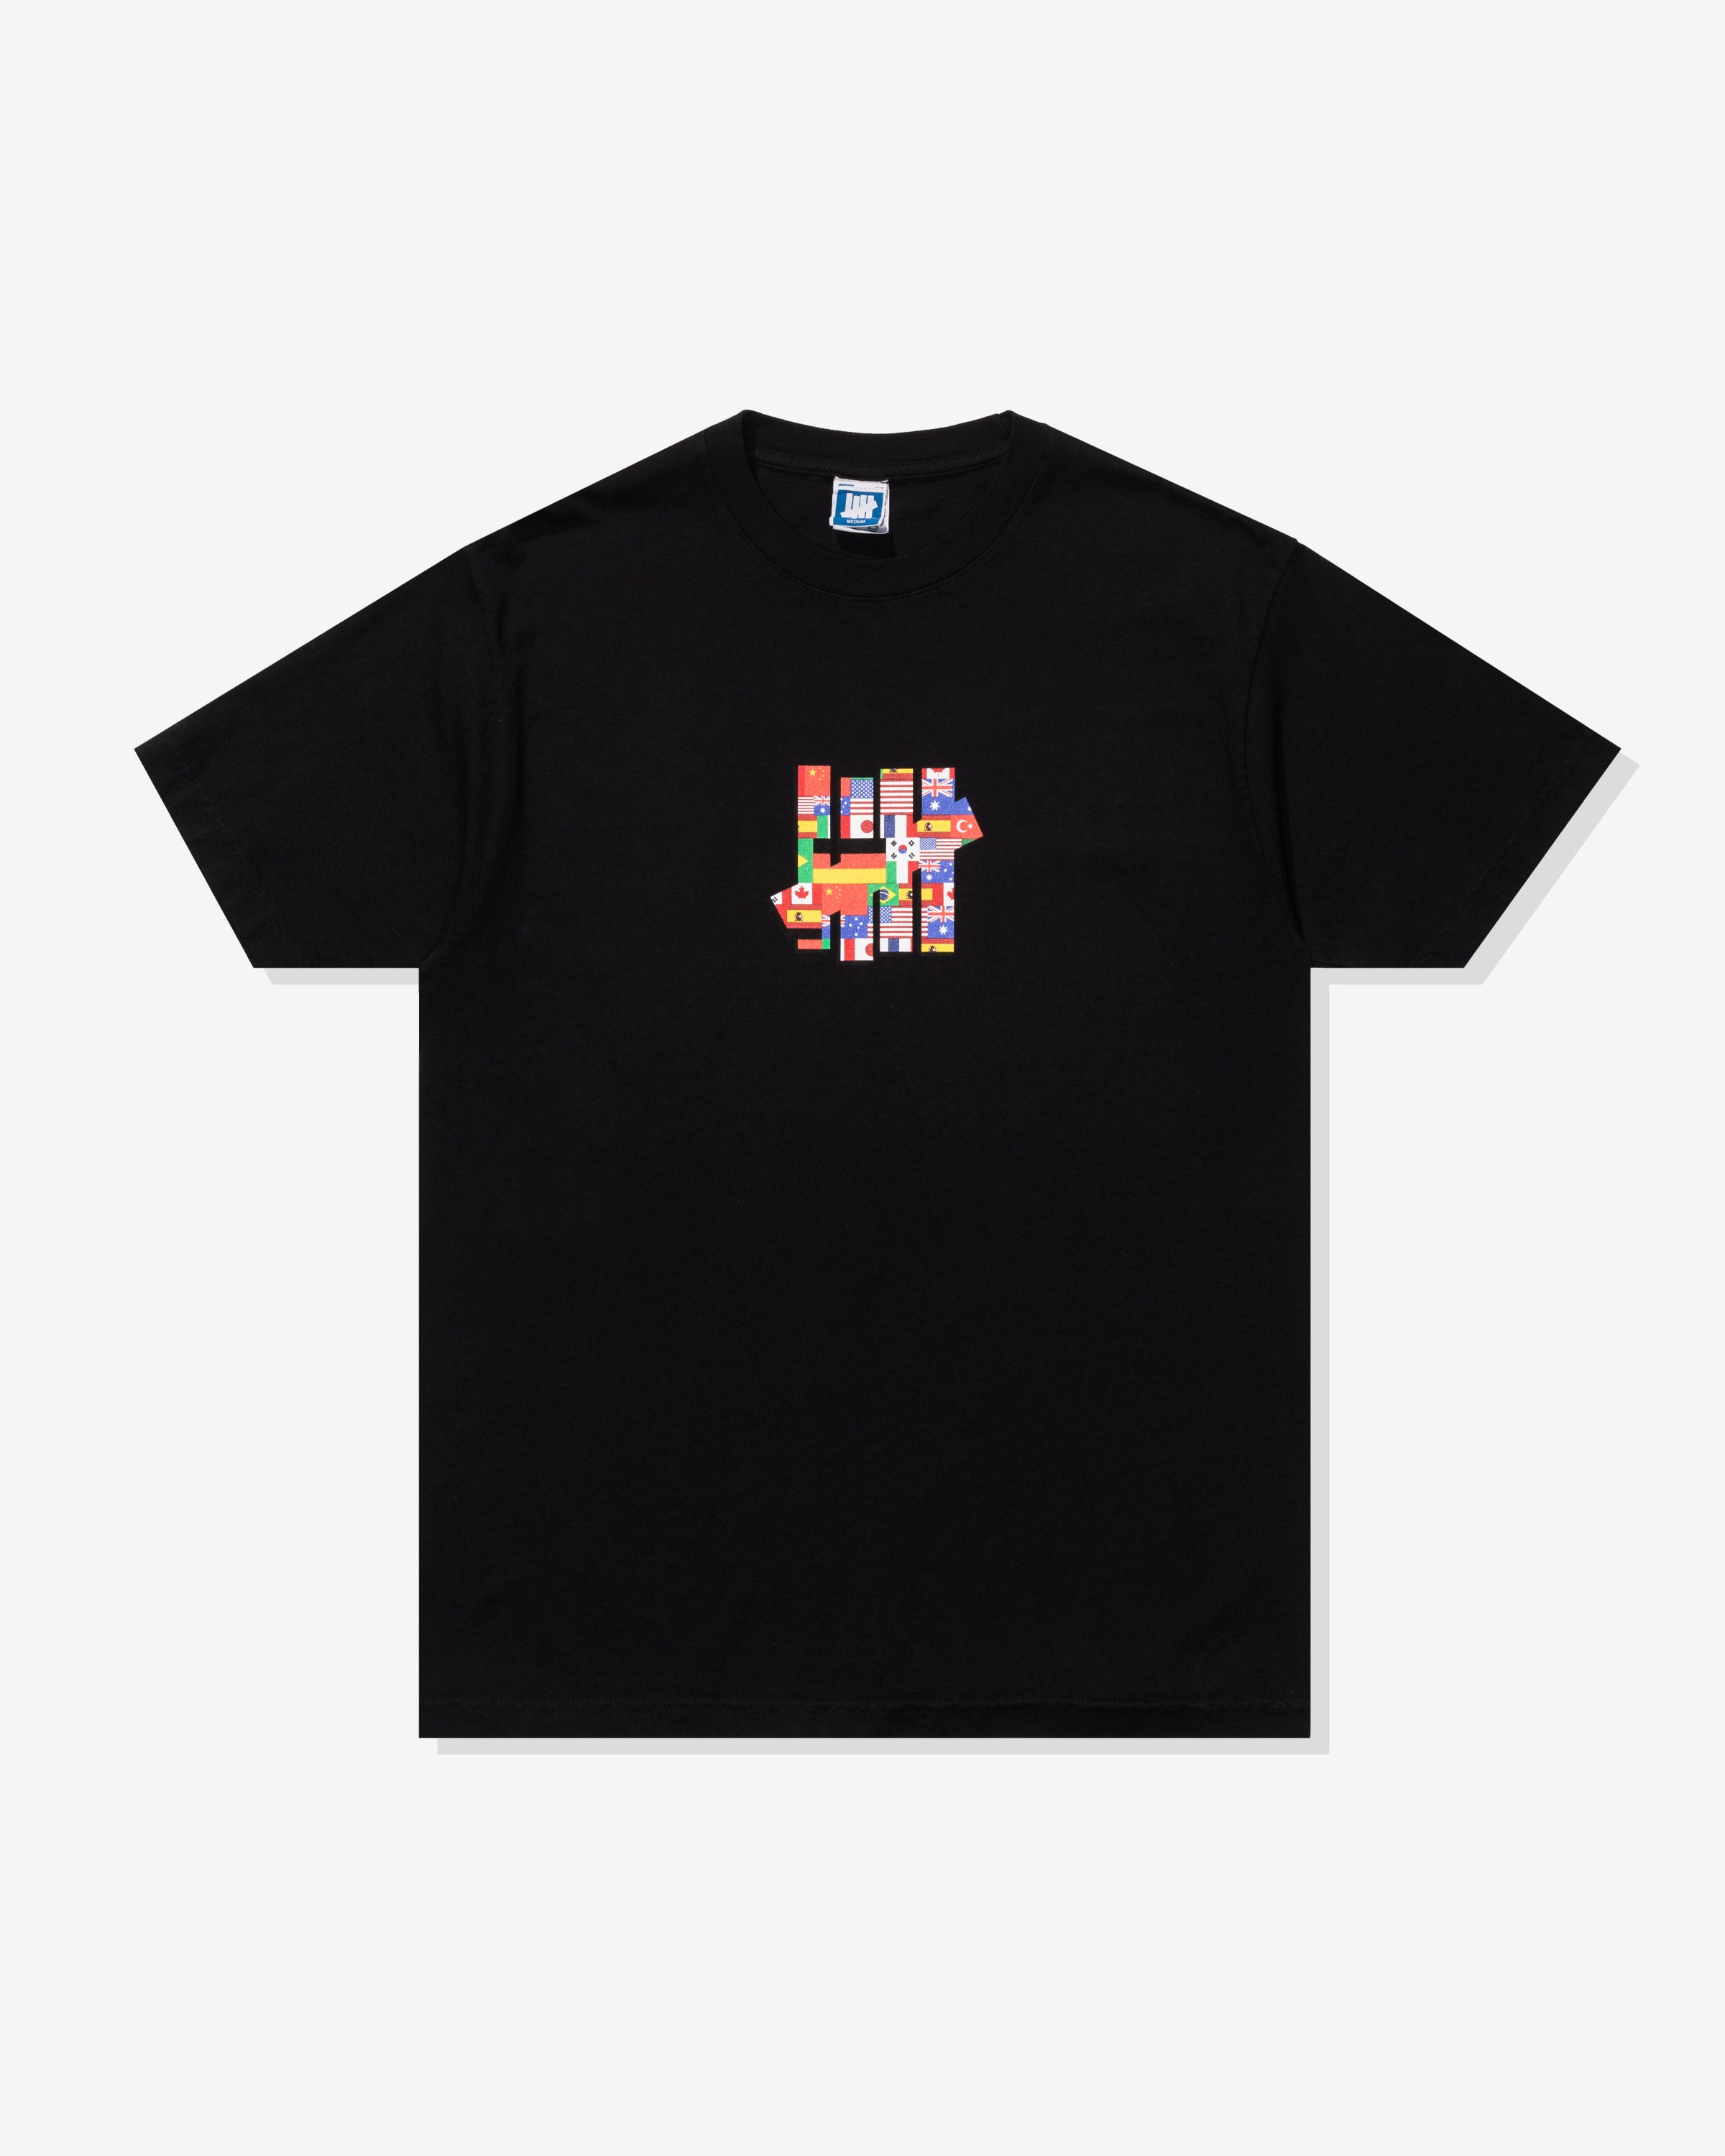 UNDEFEATED GLOBAL S/S TEE